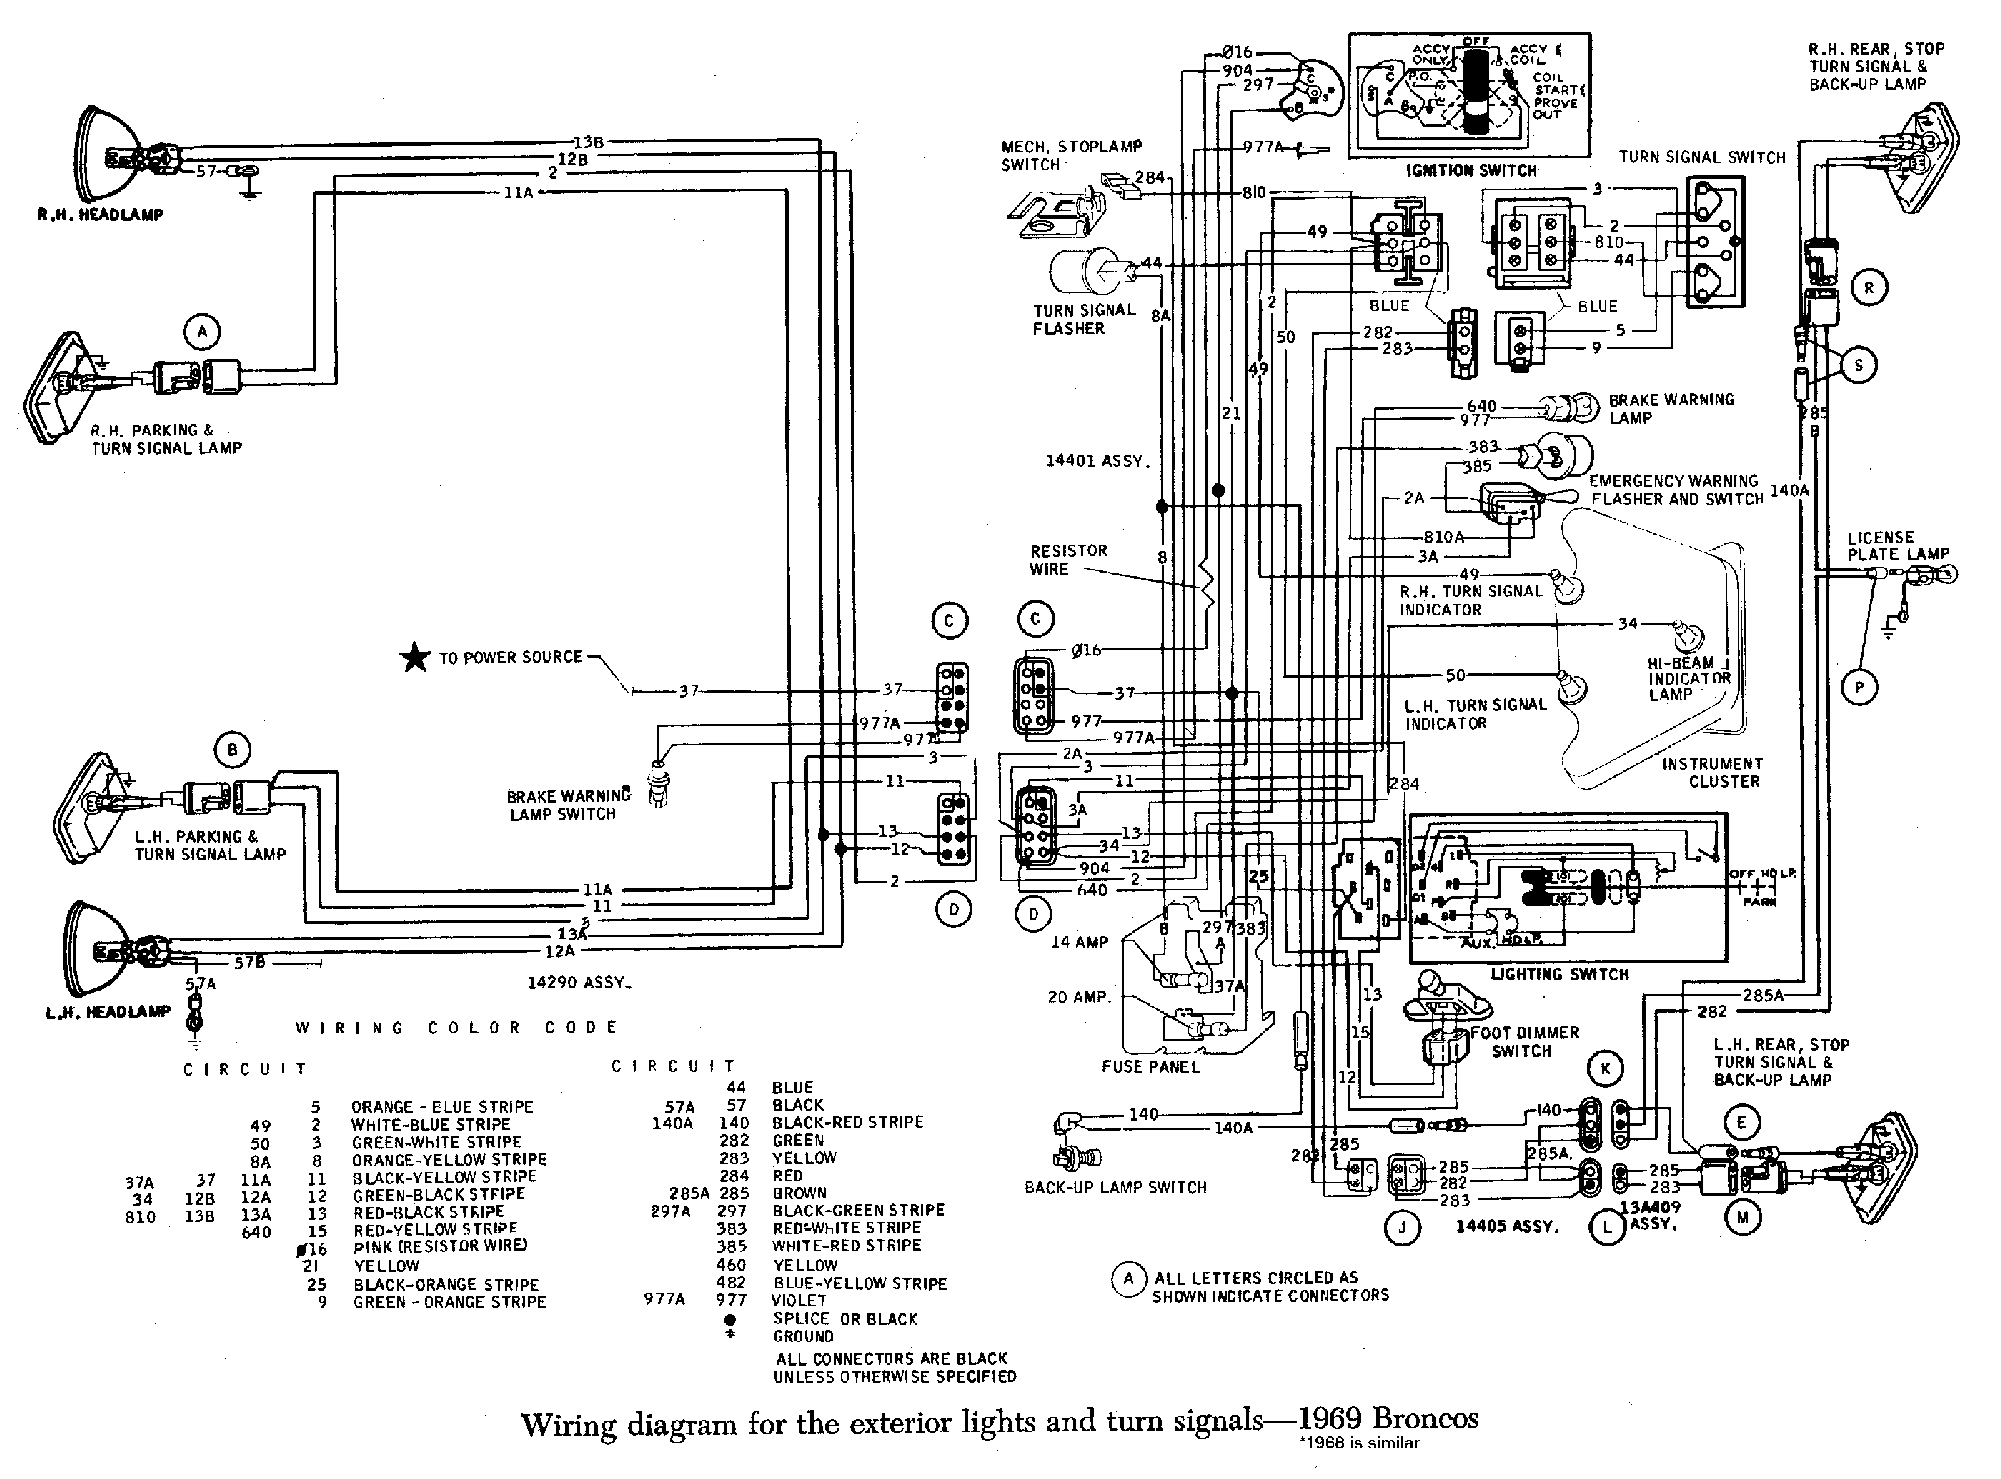 Early Bronco Ignition Switch Wiring Diagram - Wiring Diagram